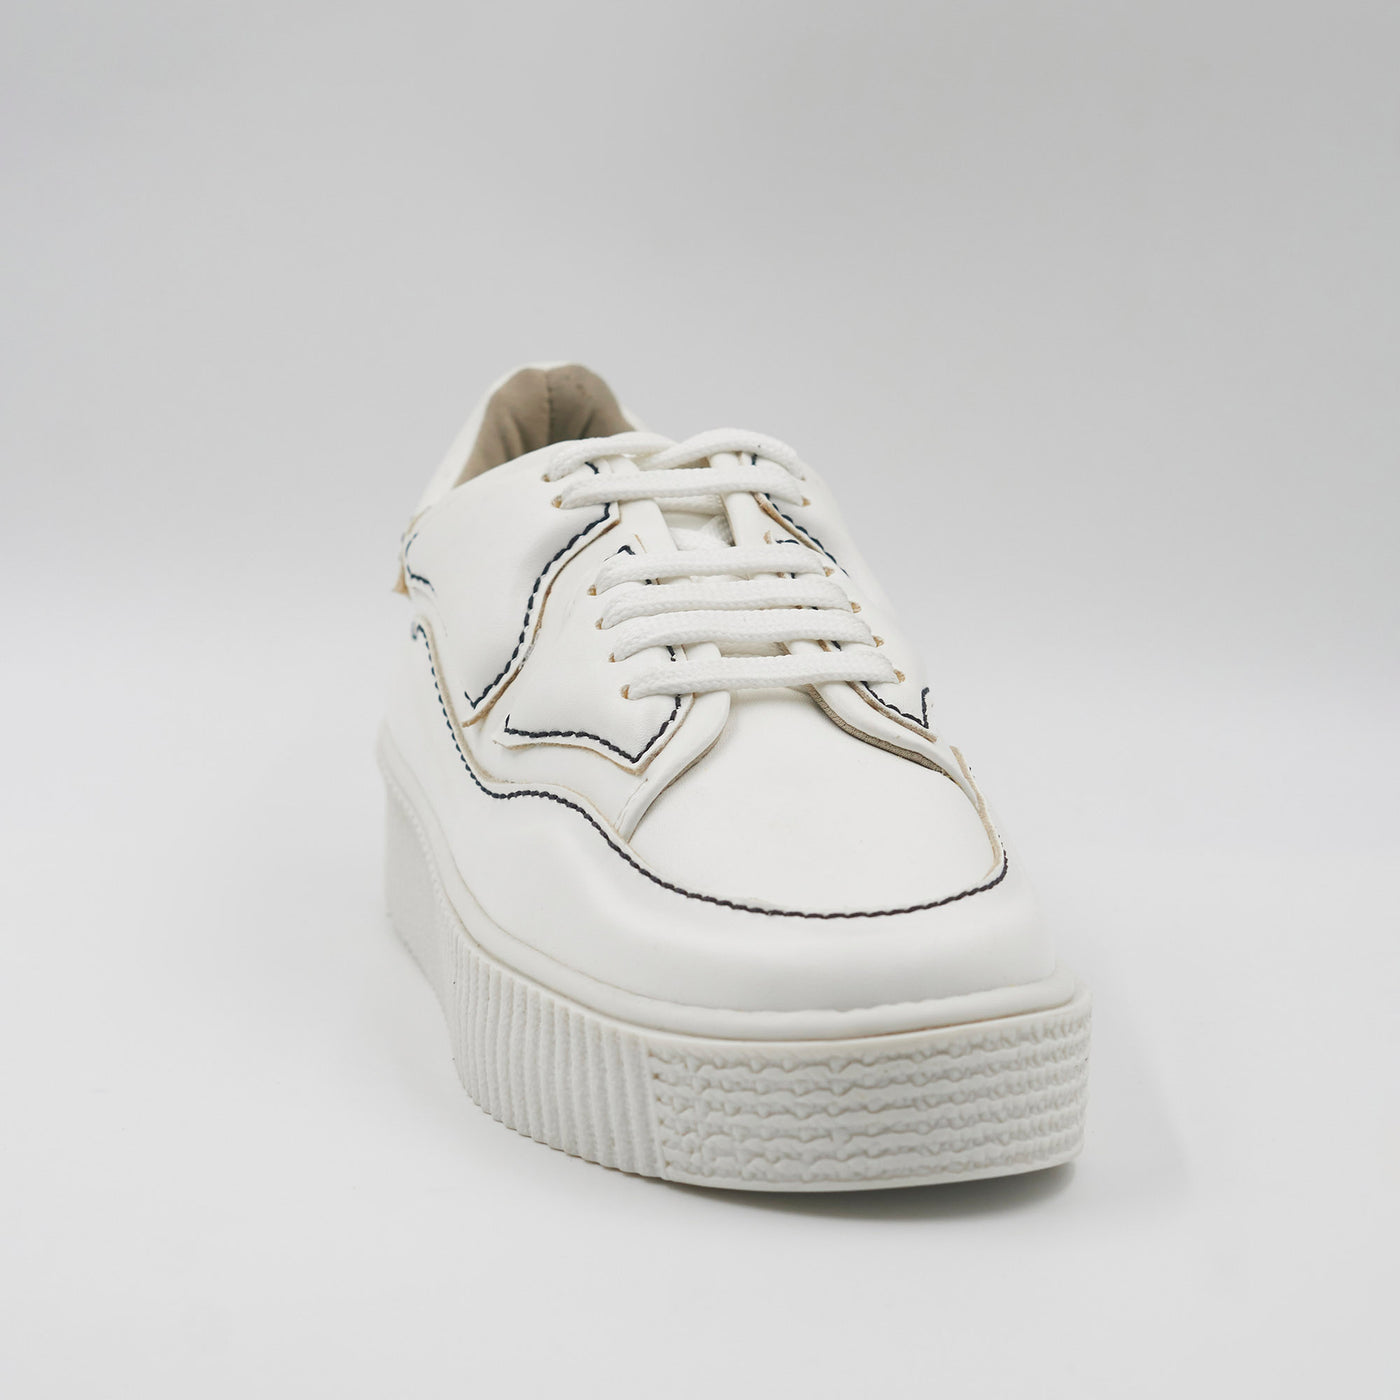 Patchworked Platform Sneakers-White